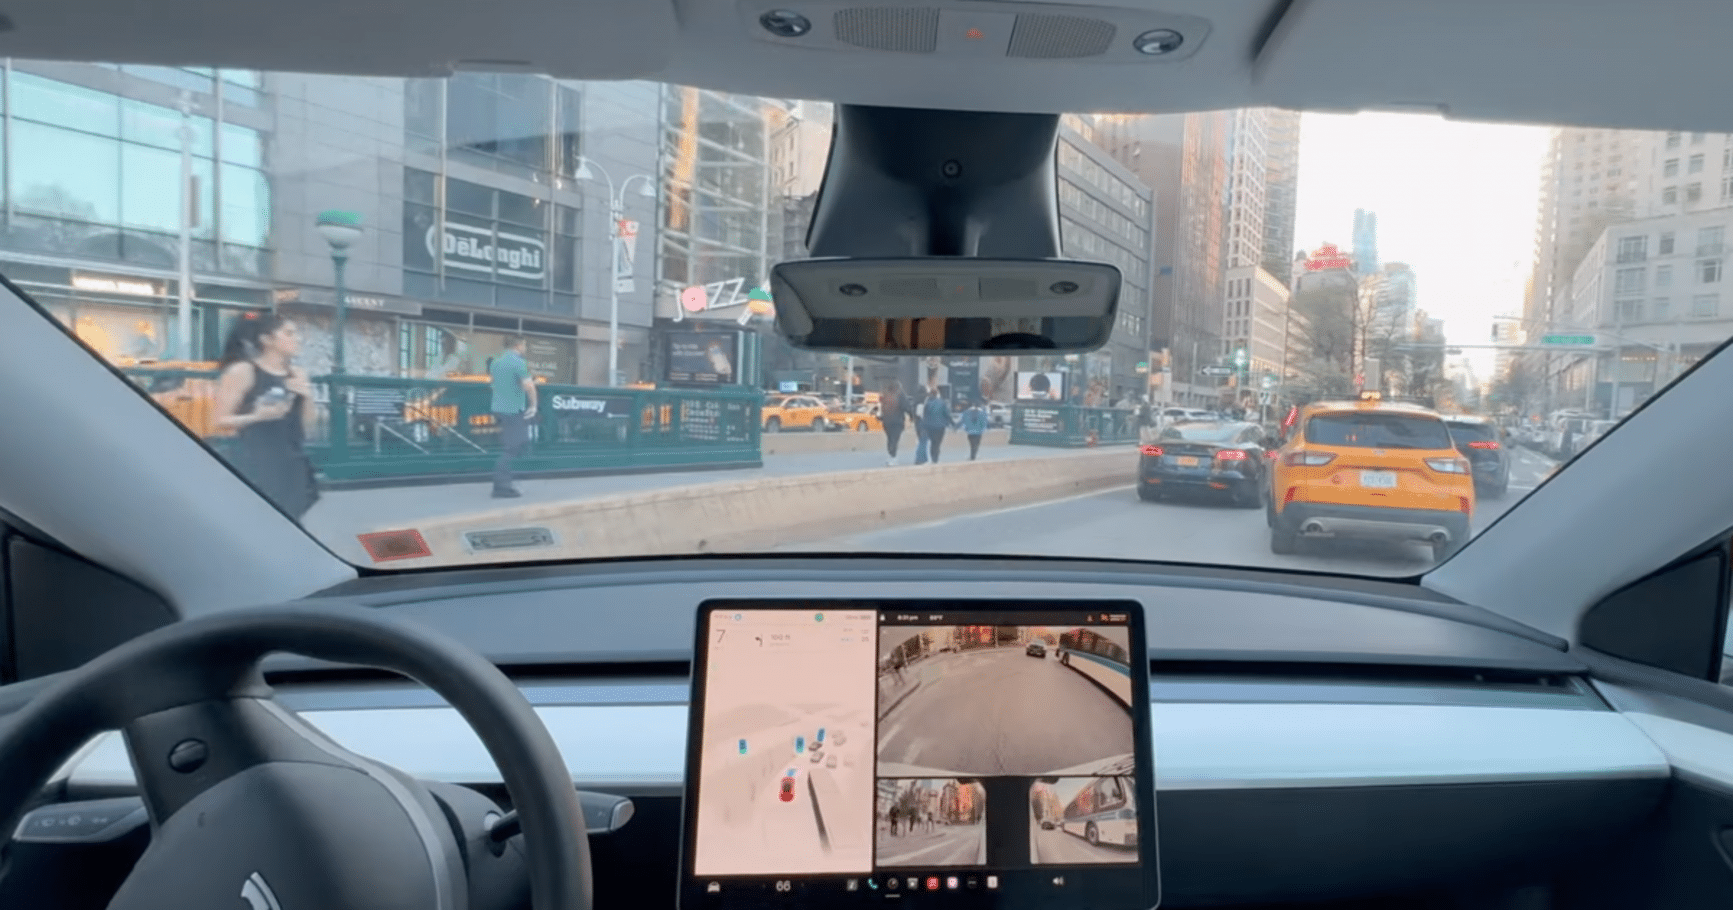 Tesla’s Full Self-Driving Technology Improves with Impressive Maneuvers in Manhattan Traffic